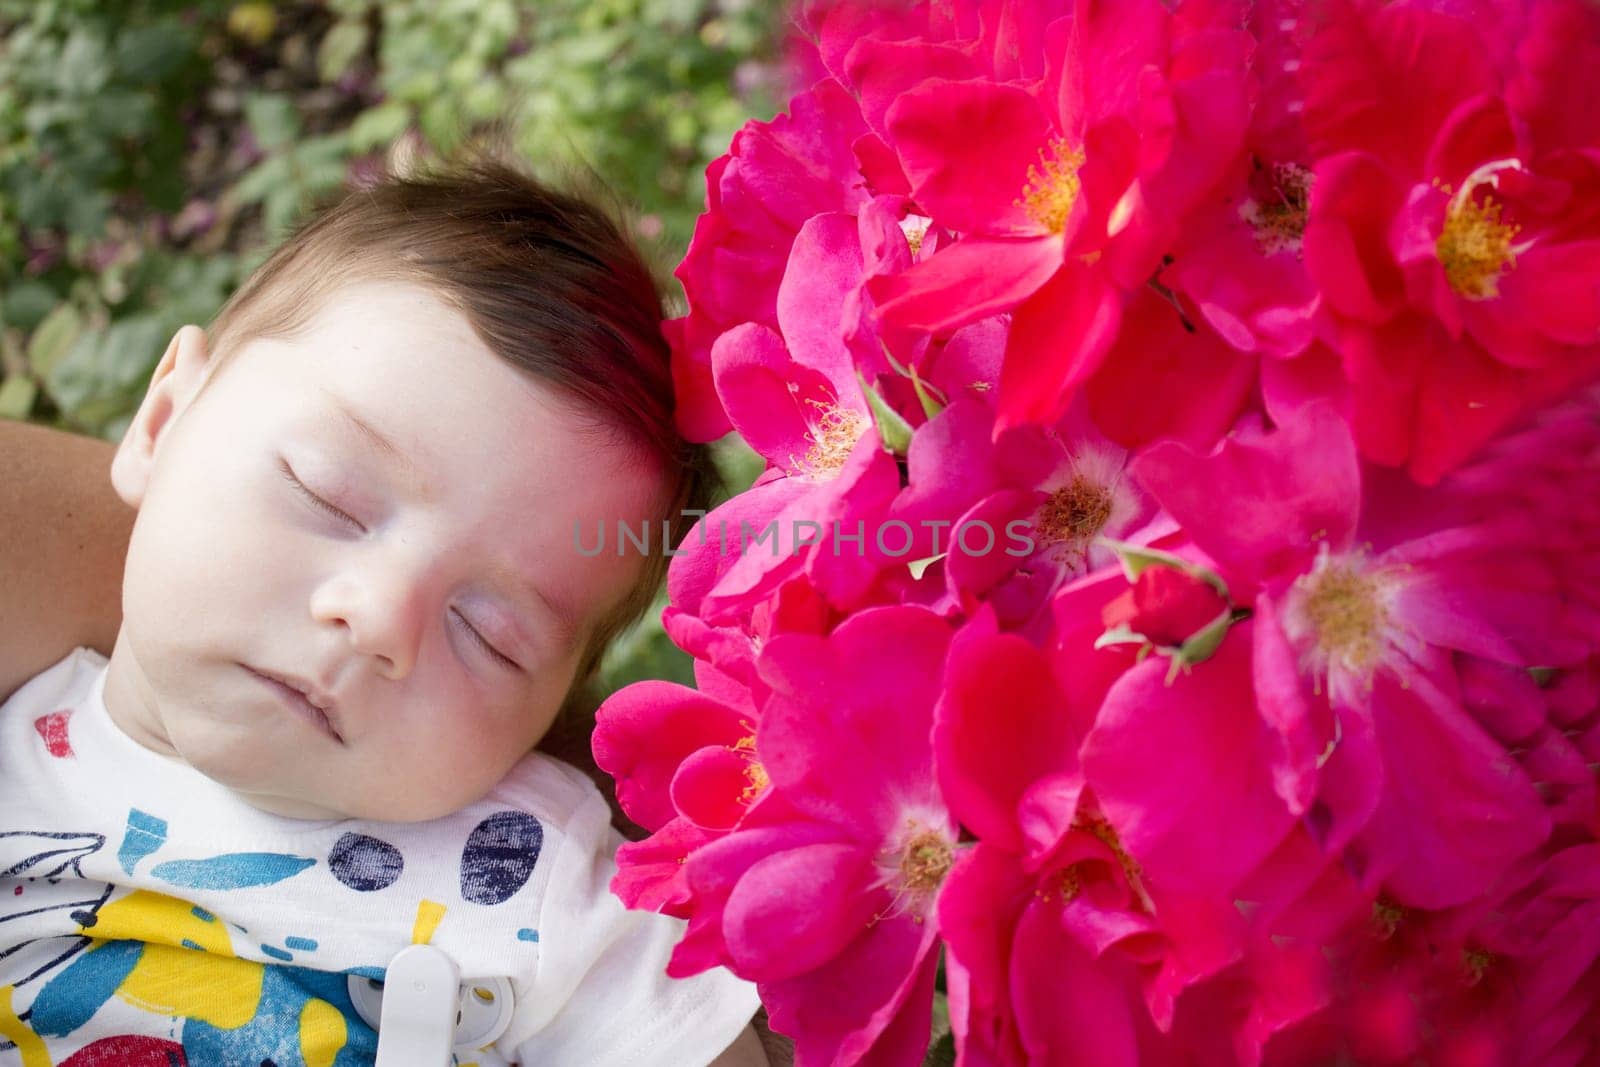 Sleeping baby surrounded by pink flowers. Spring time